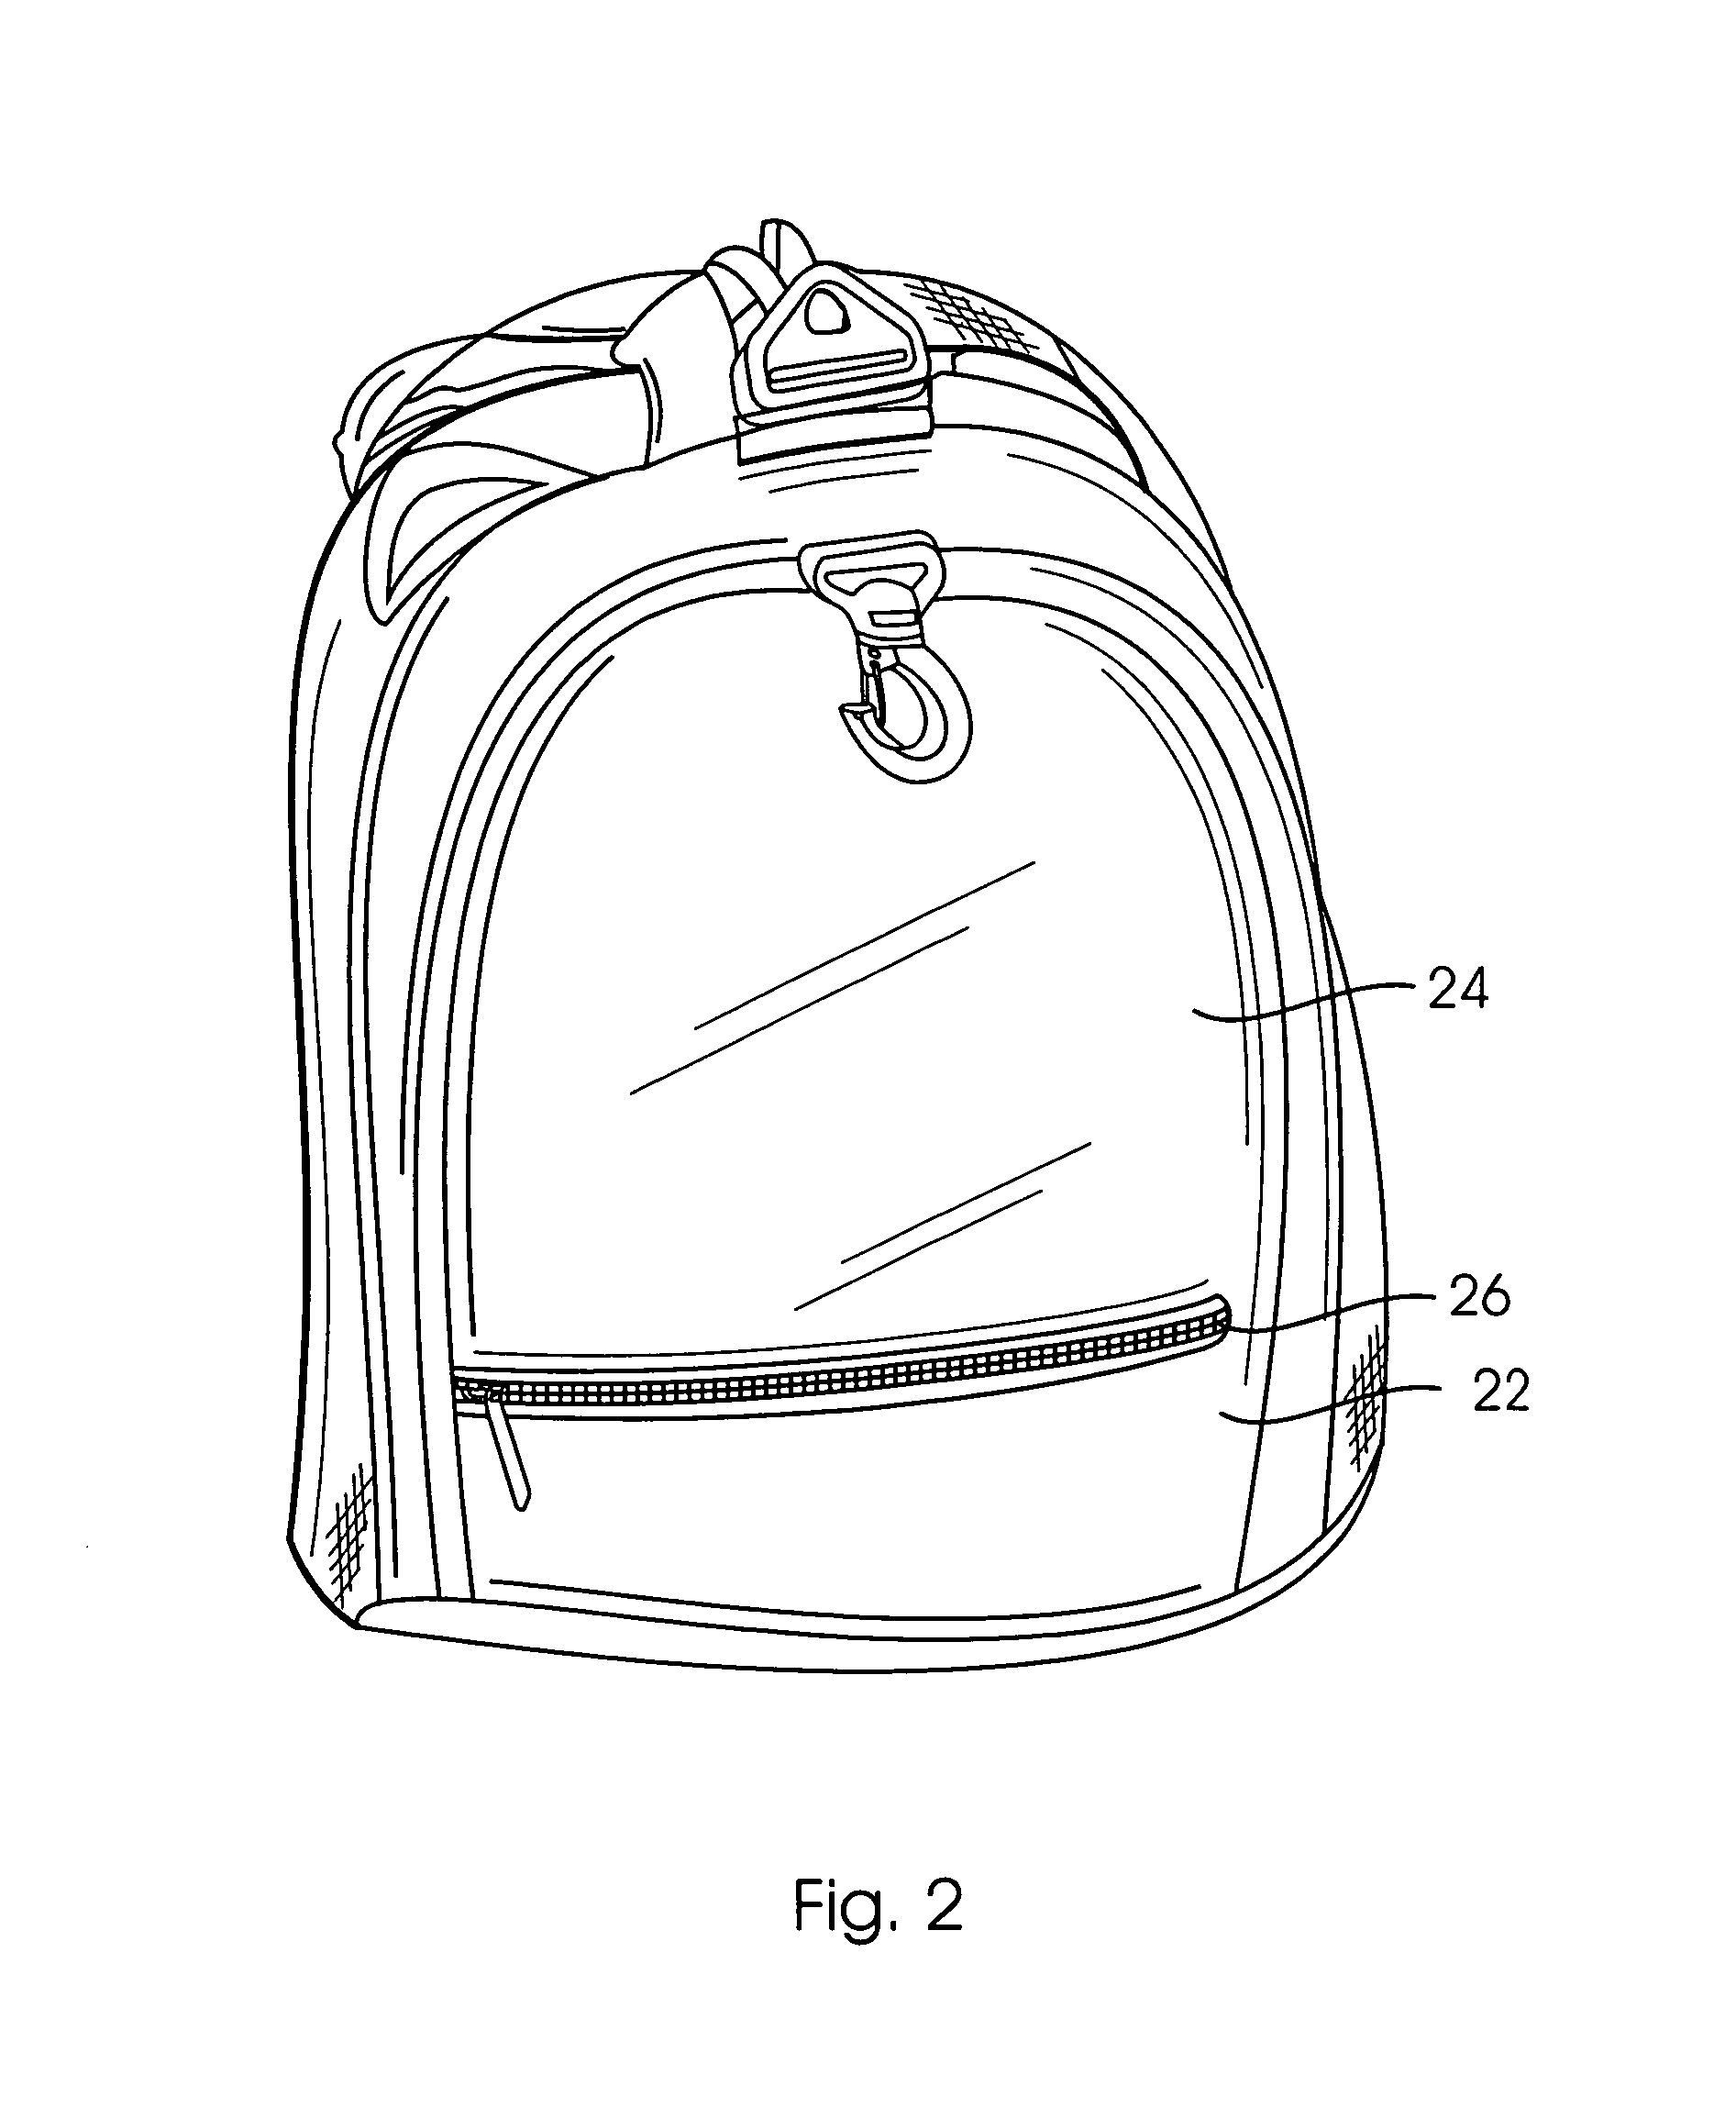 Carrying bags and backpacks with expandable retainer to contain and securely carry large objects